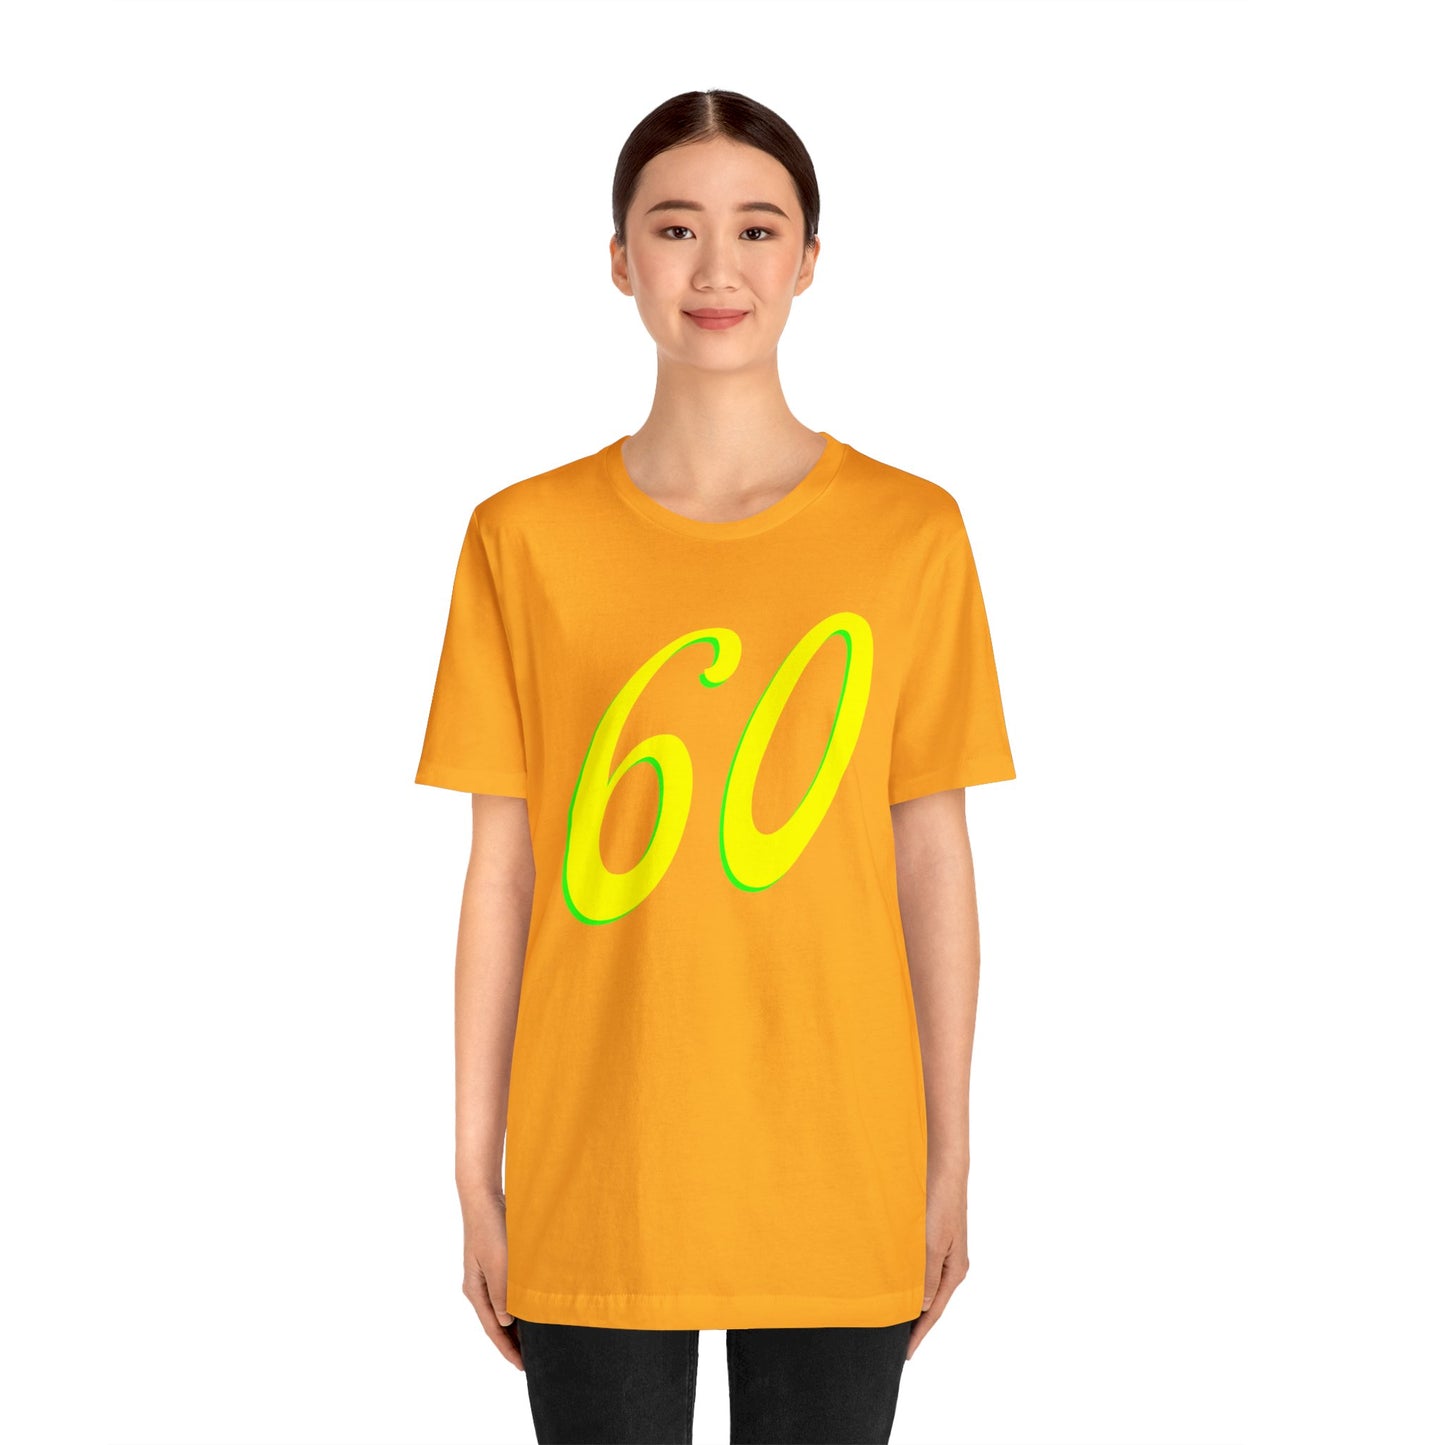 Number 60 Design - Soft Cotton Tee for birthdays and celebrations, Gift for friends and family, Multiple Options by clothezy.com in Black Size Medium - Buy Now